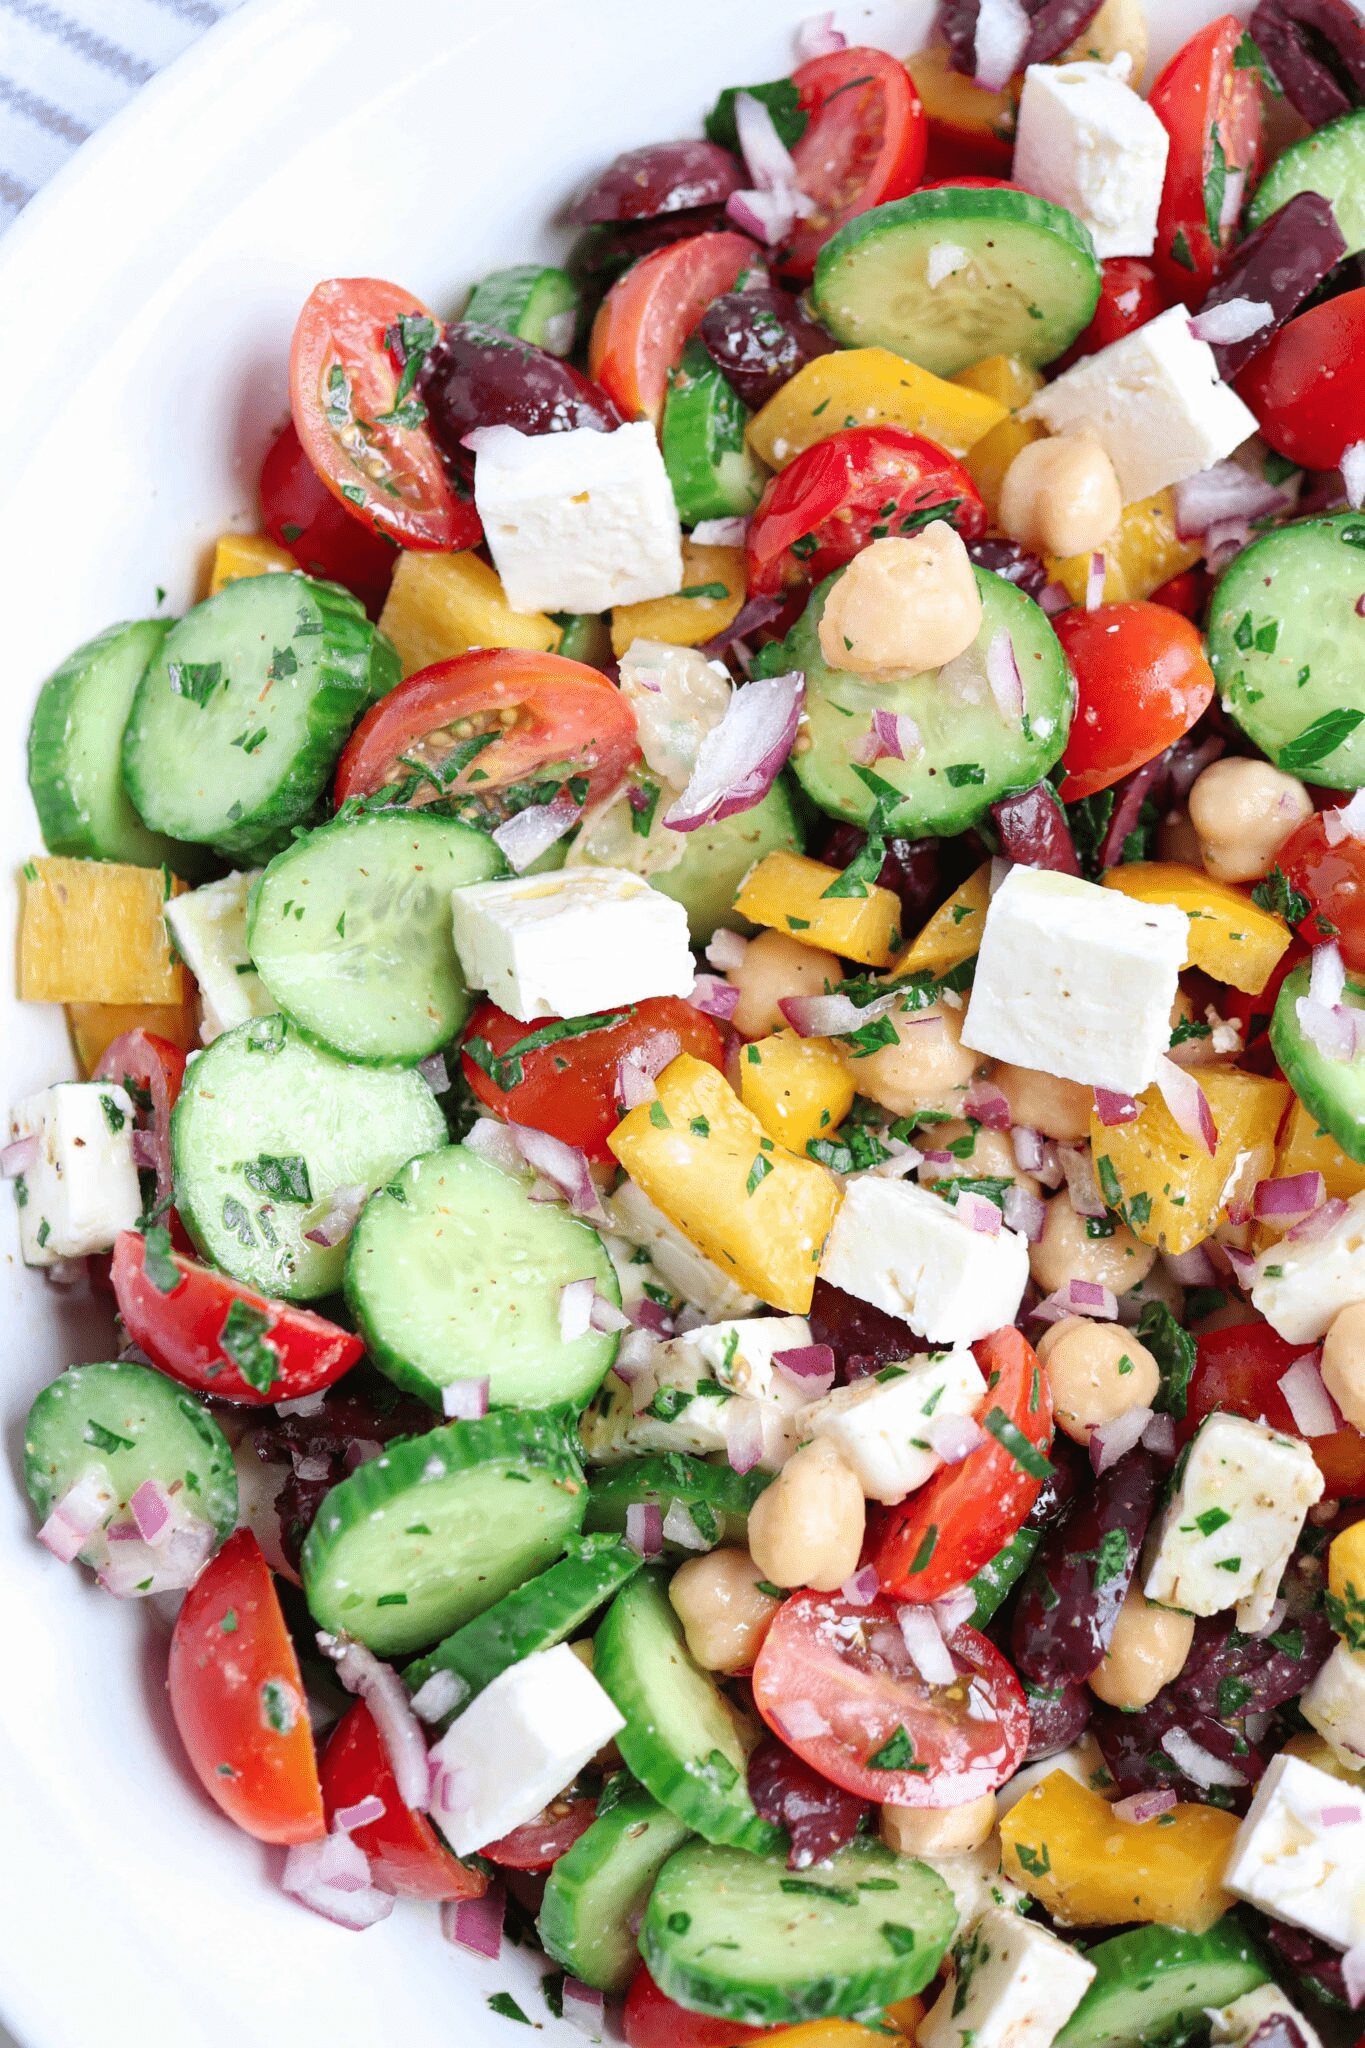 Greek chickpea salad with feta cheese, tomatoes, cucumbers and chickpeas in a large white bowl.